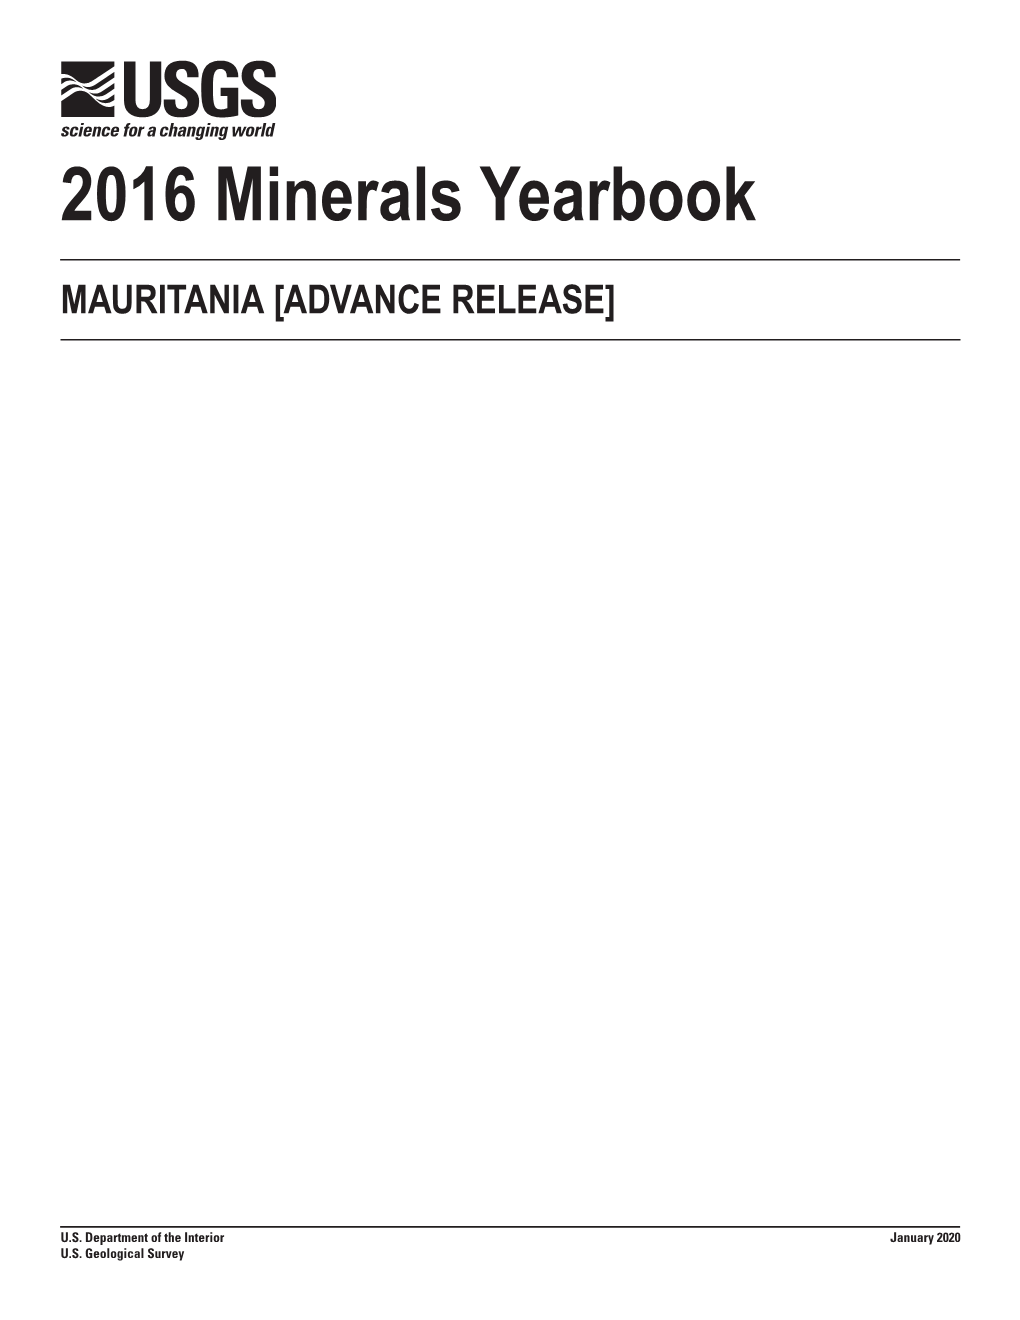 The Mineral Industry of Mauritania in 2016